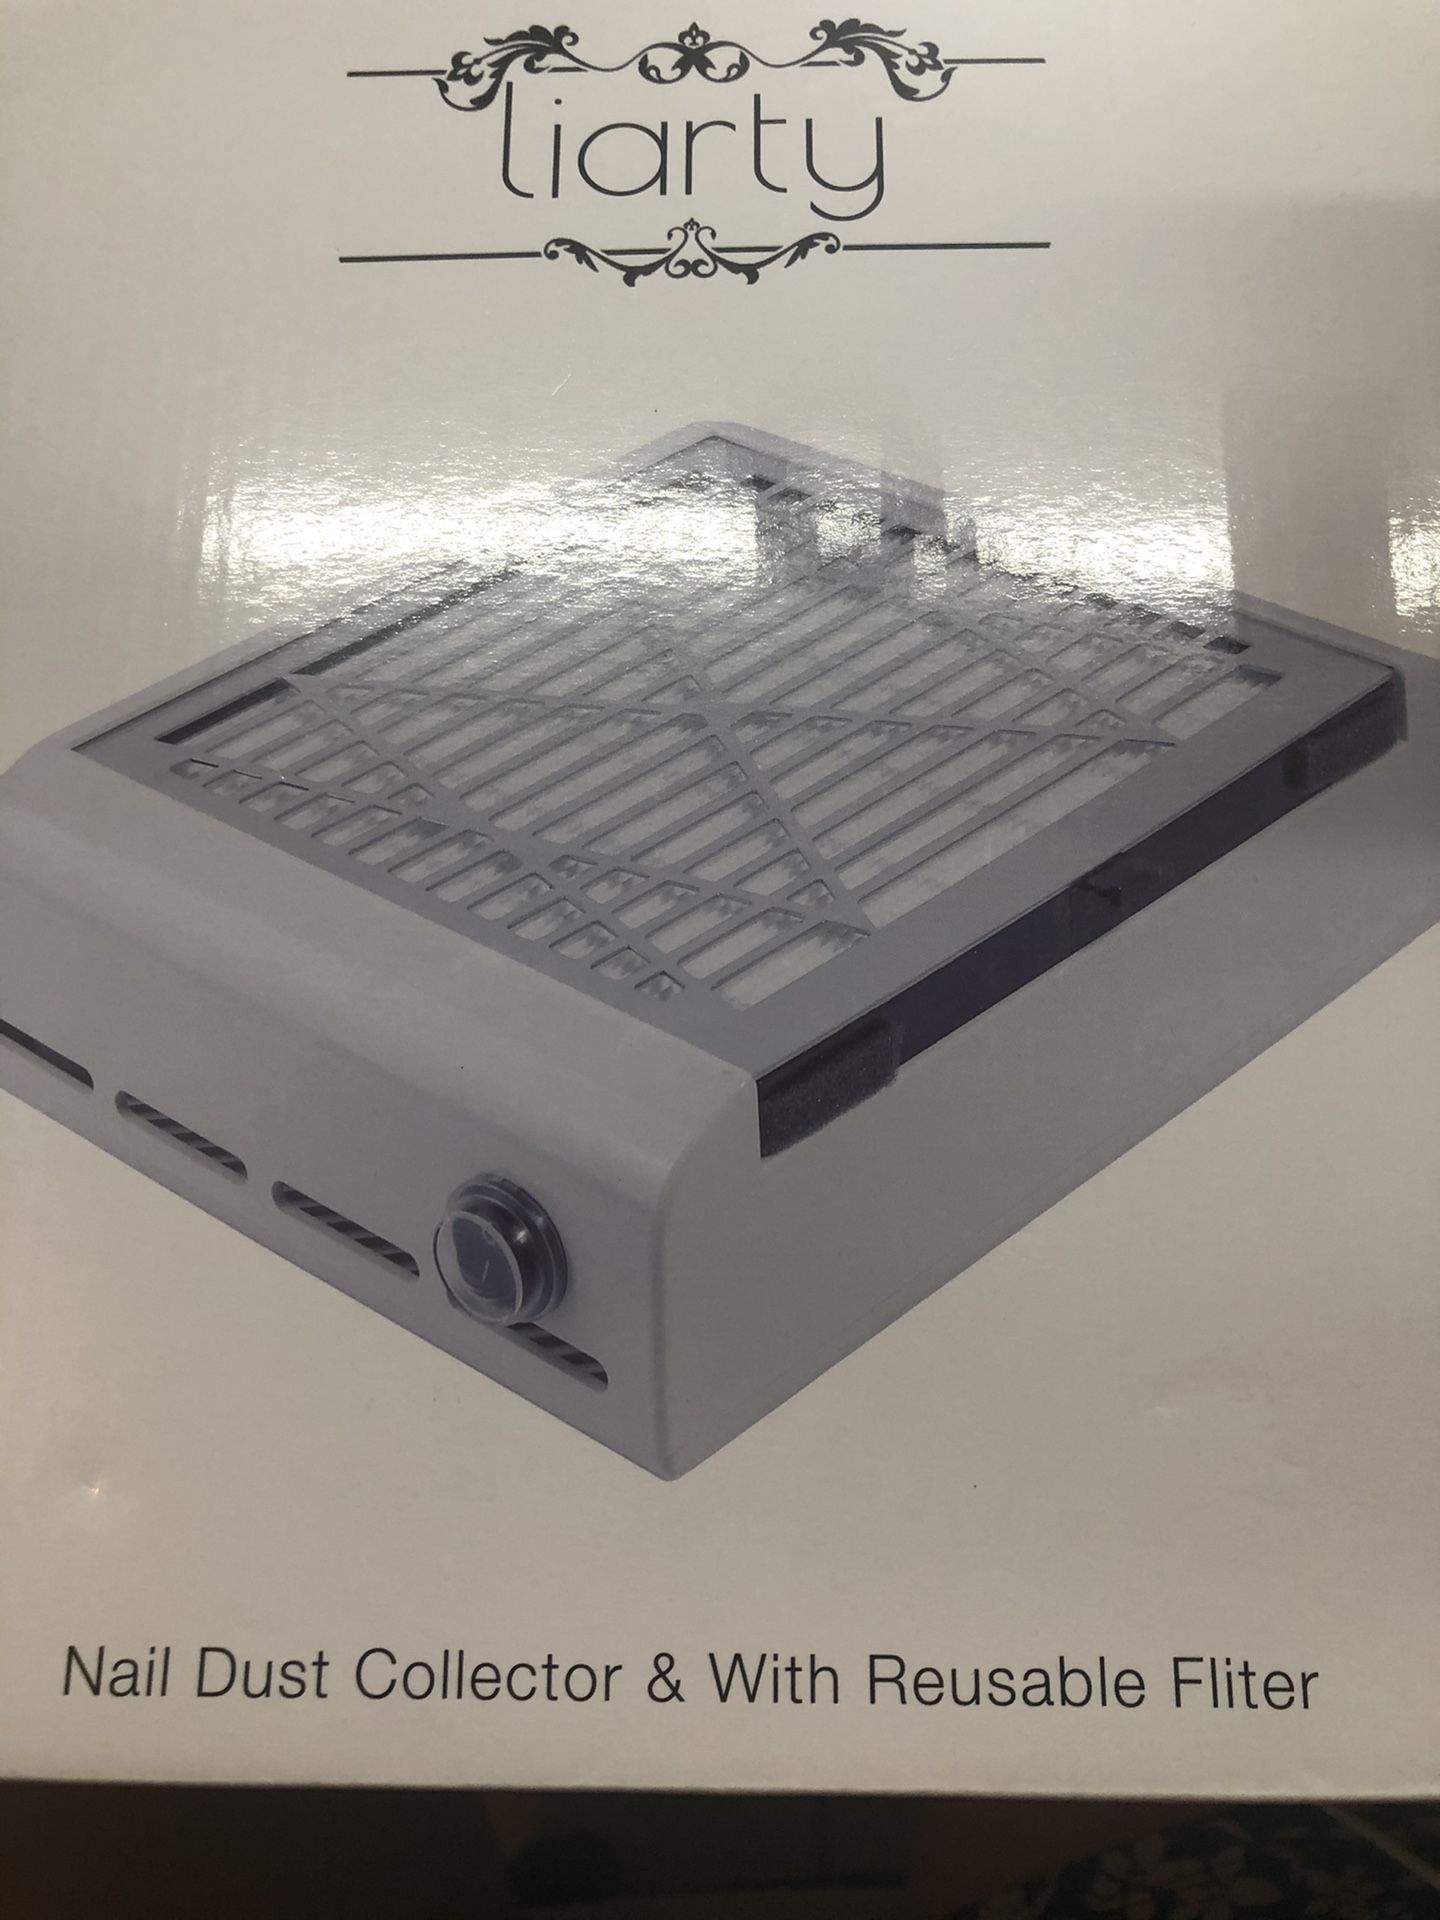 Nail Dust Collector with Reusable Filter